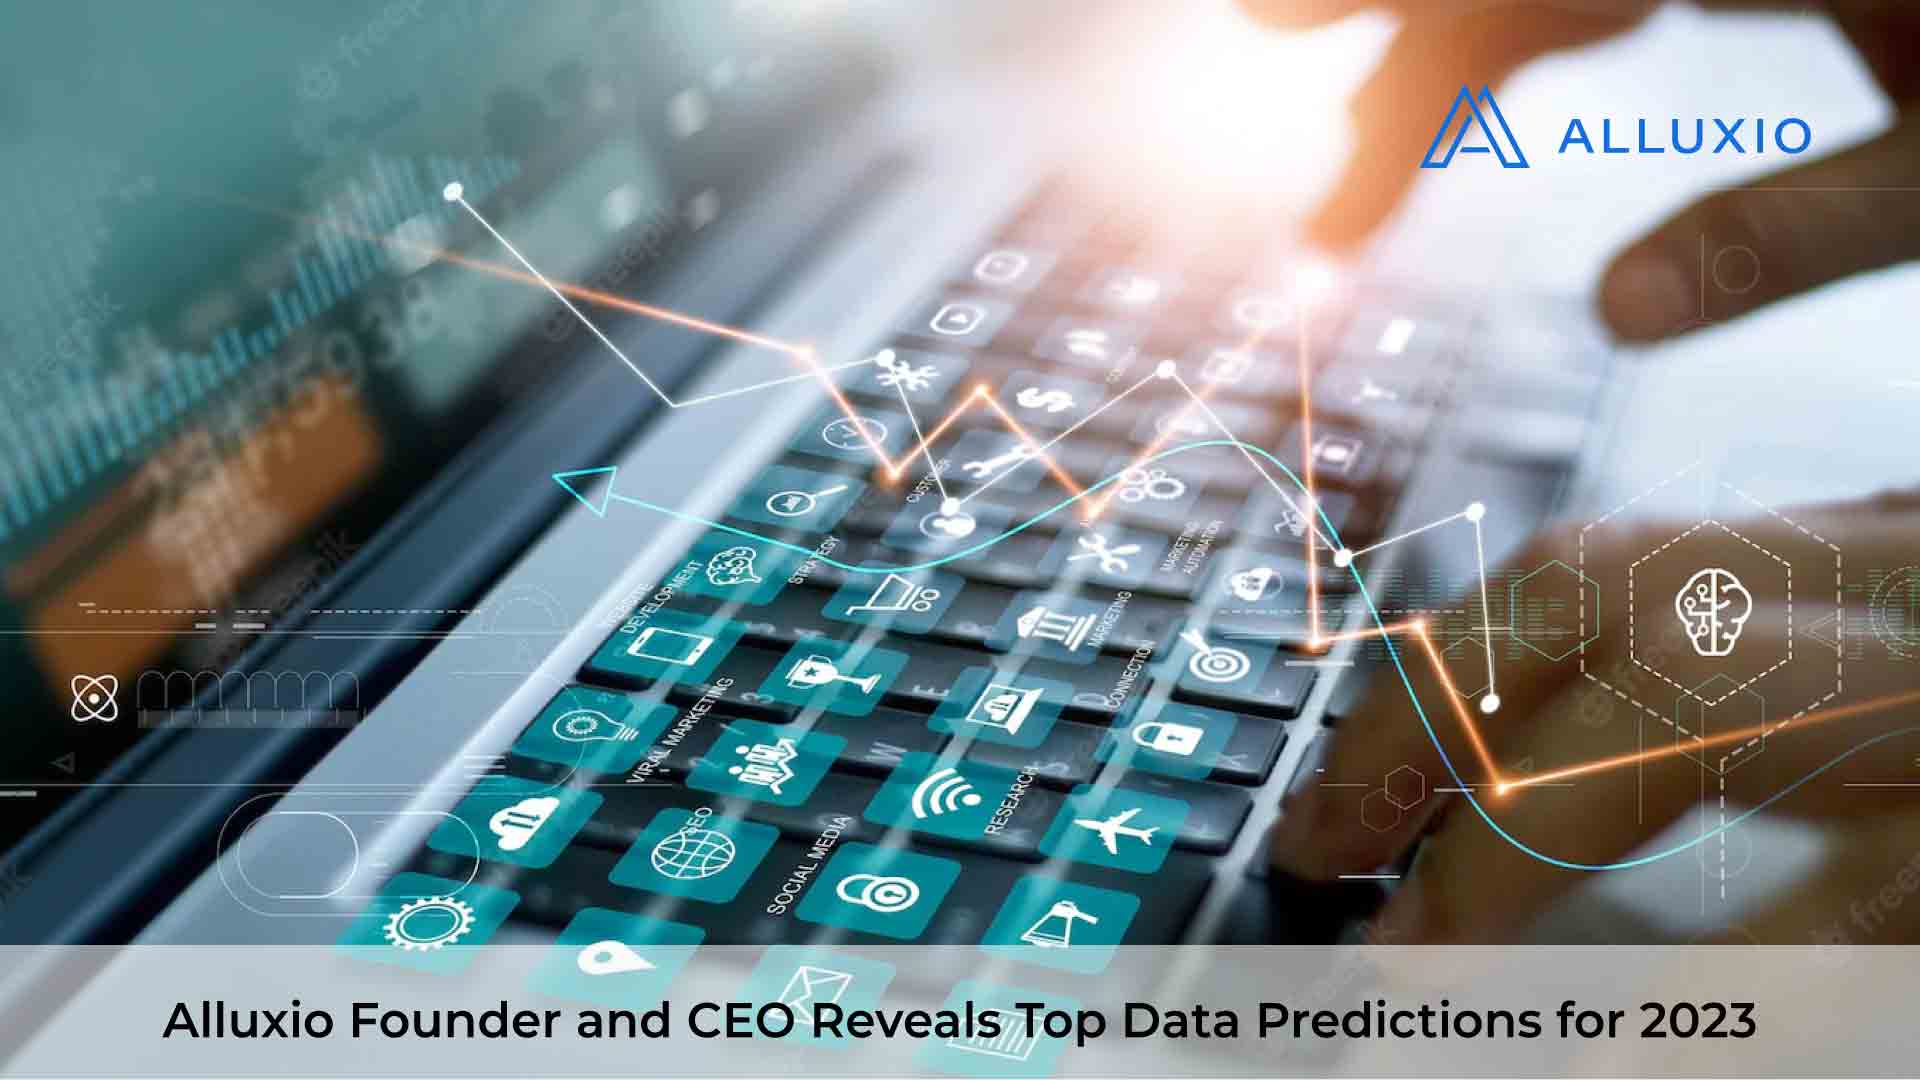 Alluxio Founder and CEO Reveals Top Data Predictions for 2023